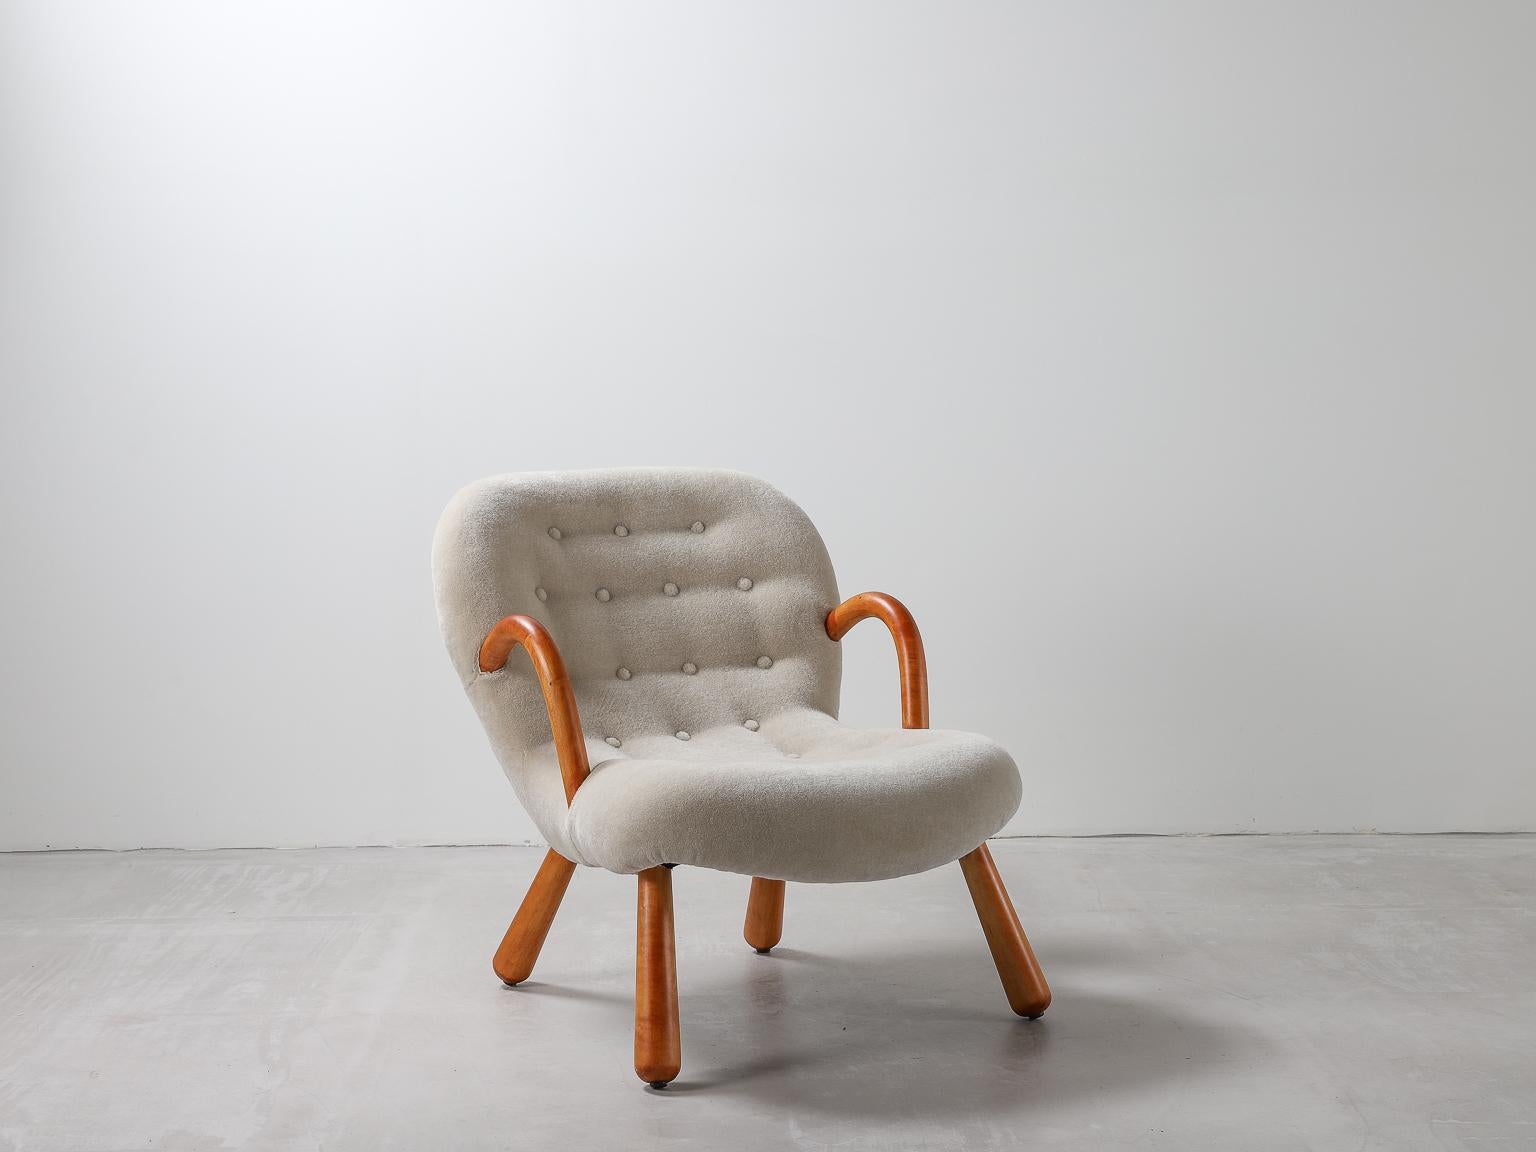 Mid-20th Century Pair of Clam Chairs by Philip Arctander 1944 in Bespoke Mohair Velvet